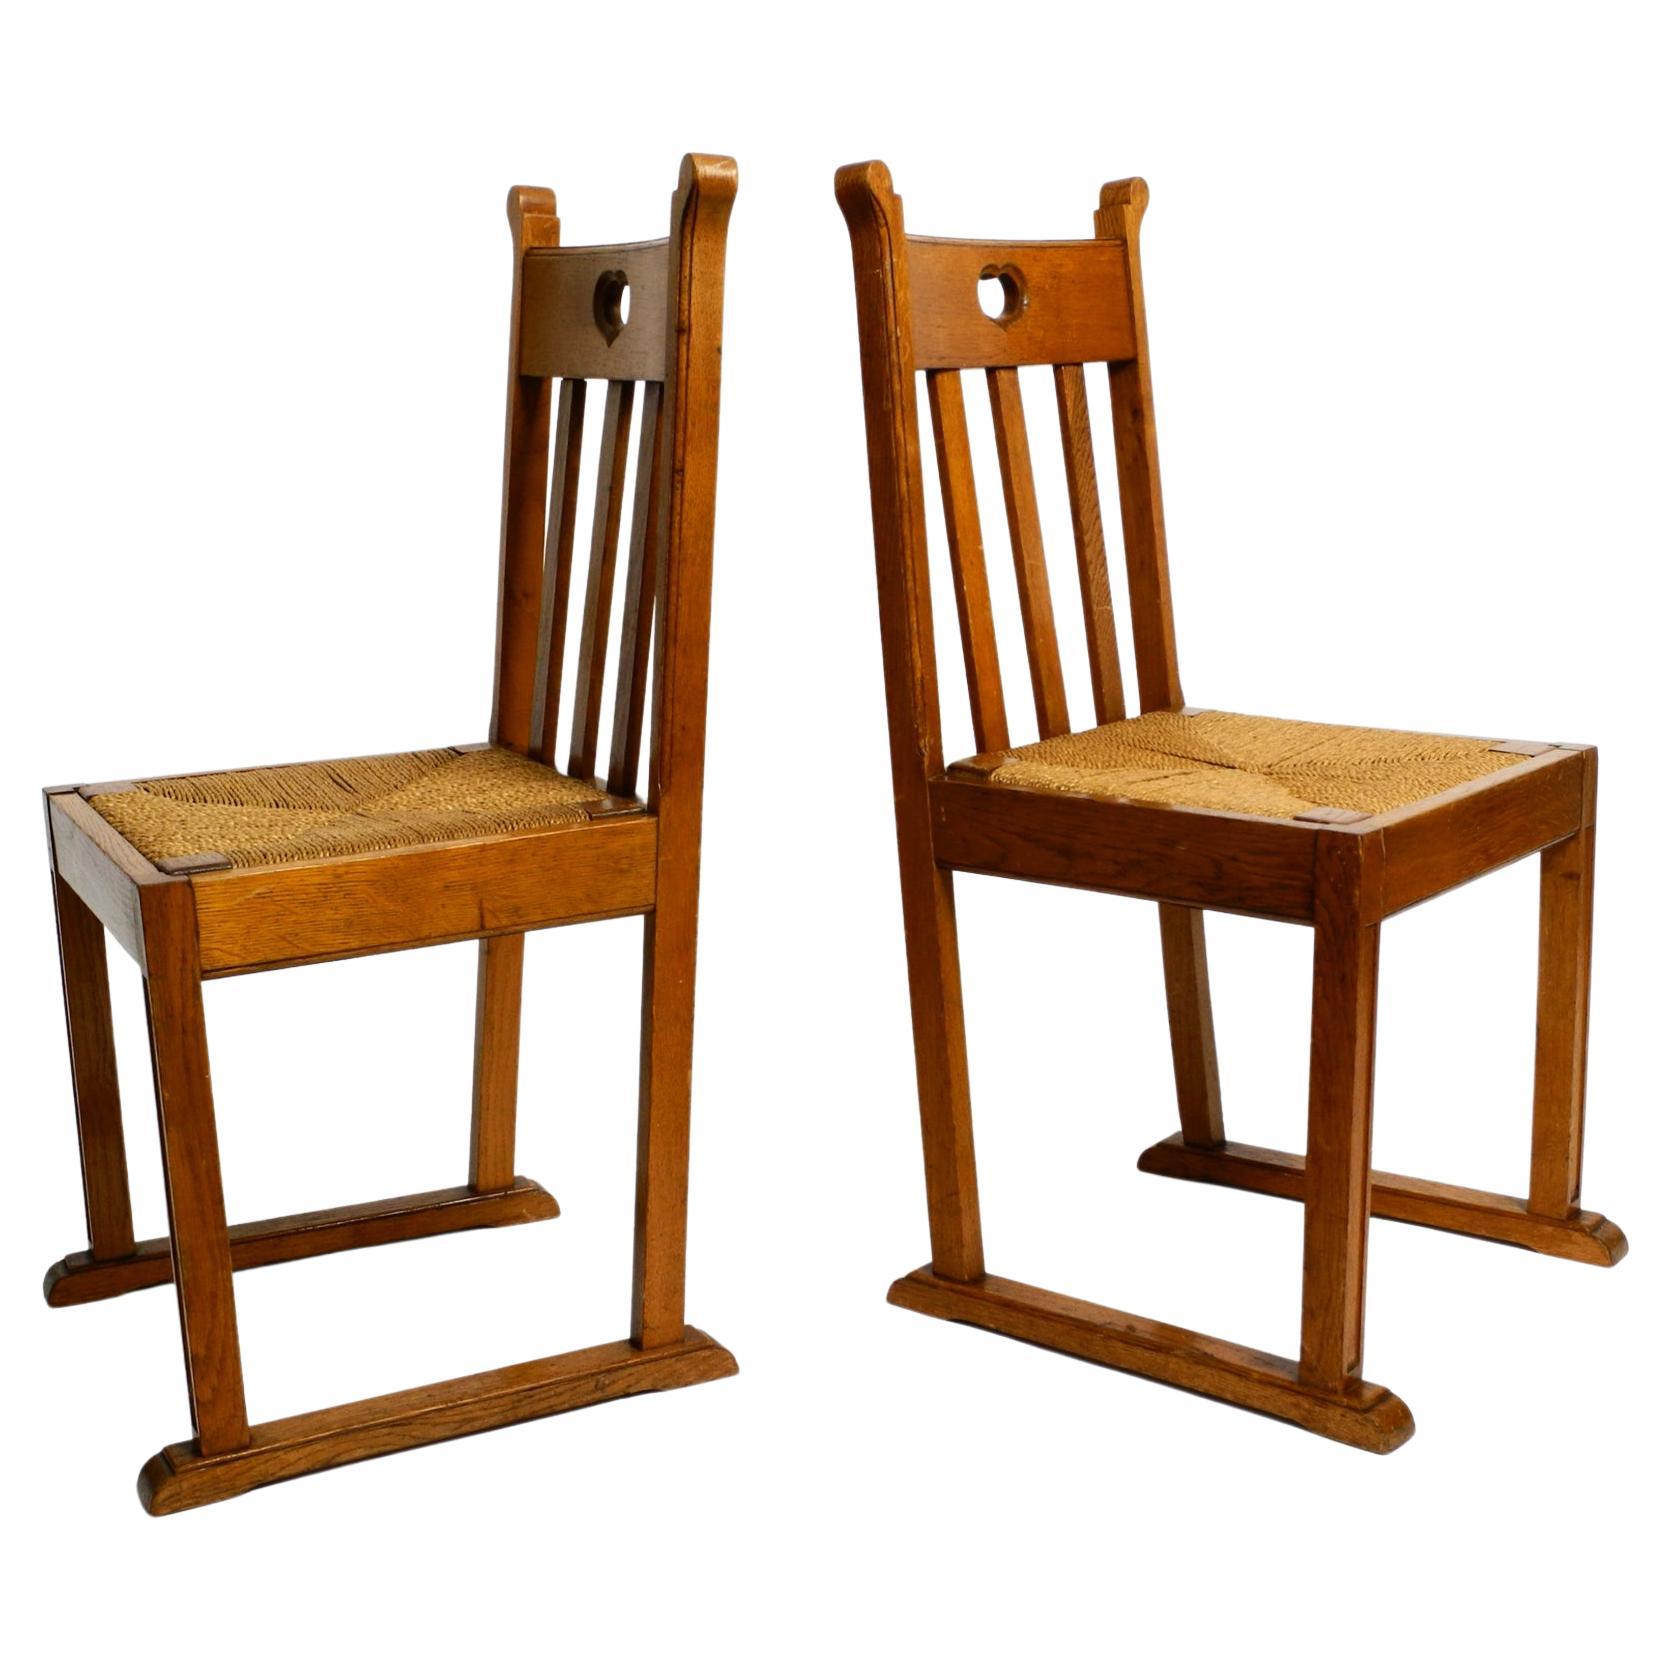 Pair of Beautiful Rare Mid Century Oak Chairs with Skid Feet and Wicker Seats For Sale